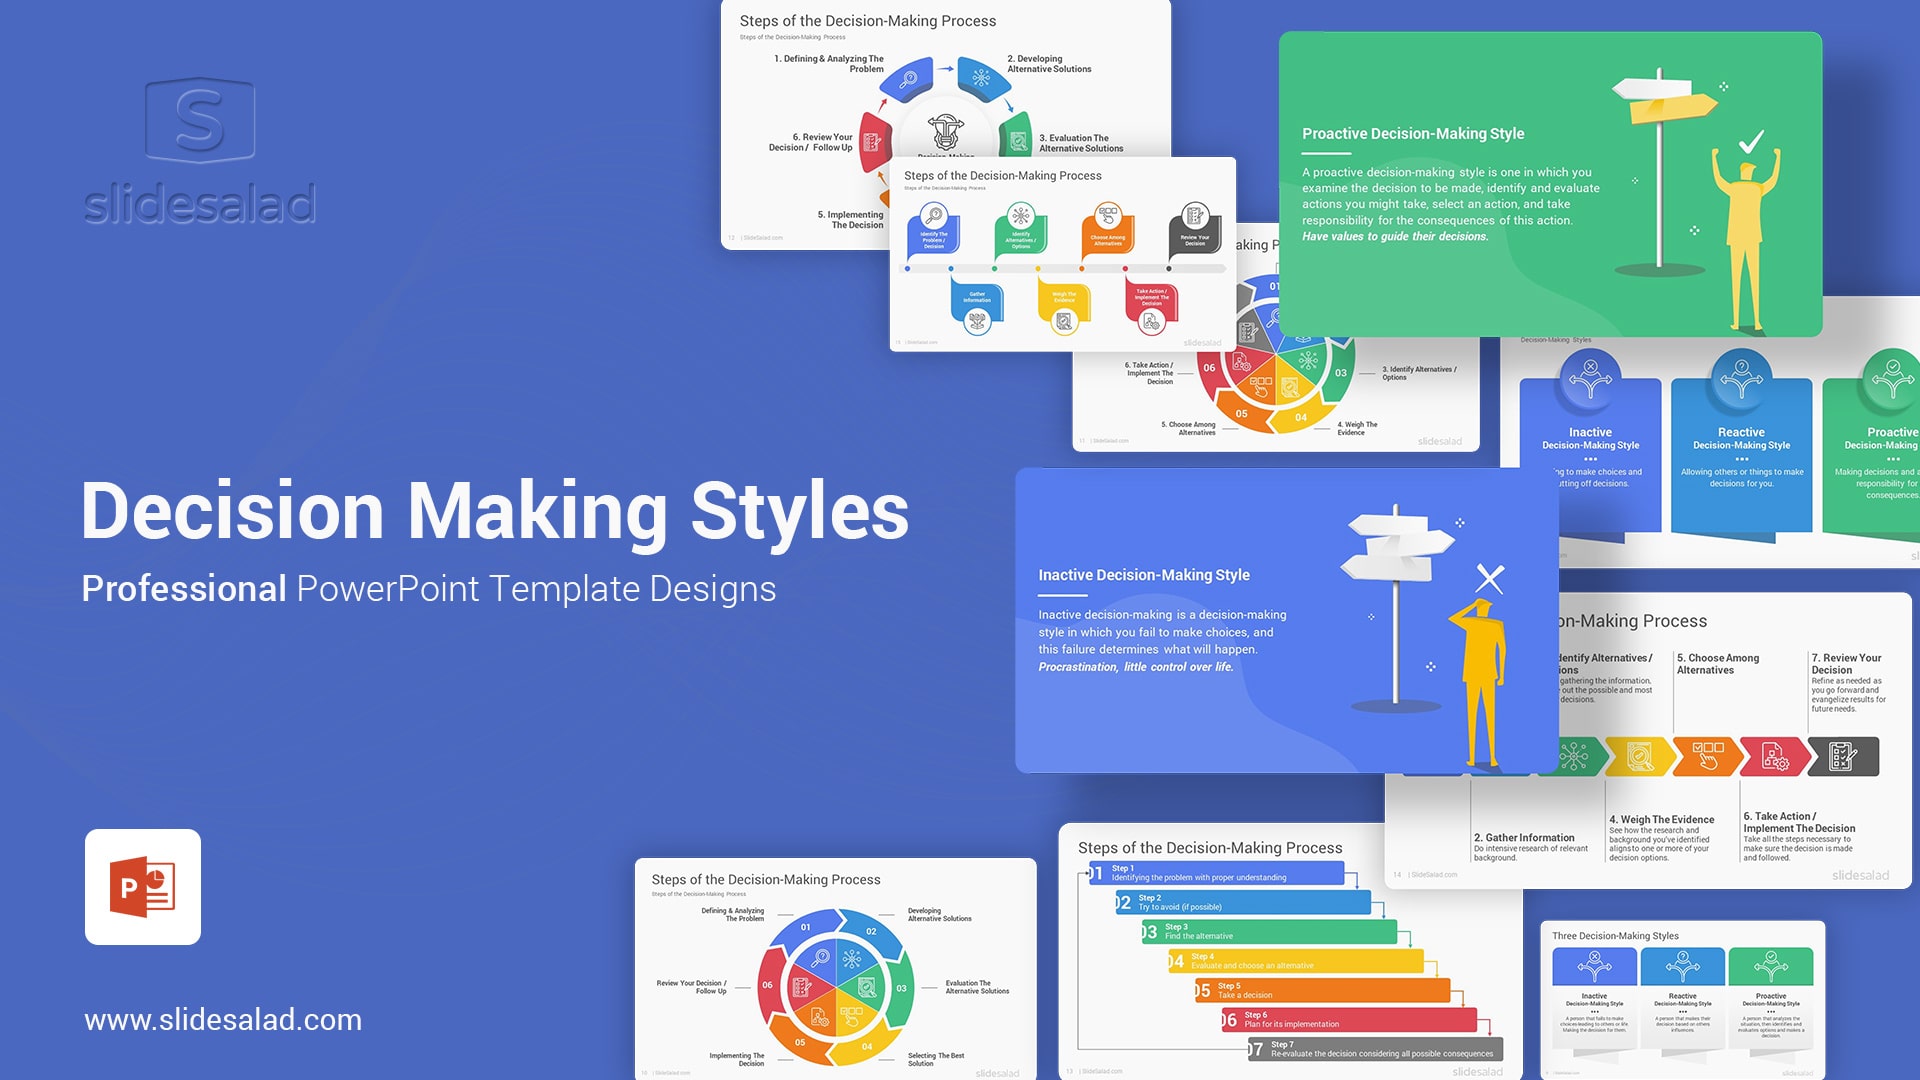 Decision Making Styles PowerPoint Template - Creative PowerPoint Theme Layouts for Implementing Inactive, Reactive, and Proactive Strategies